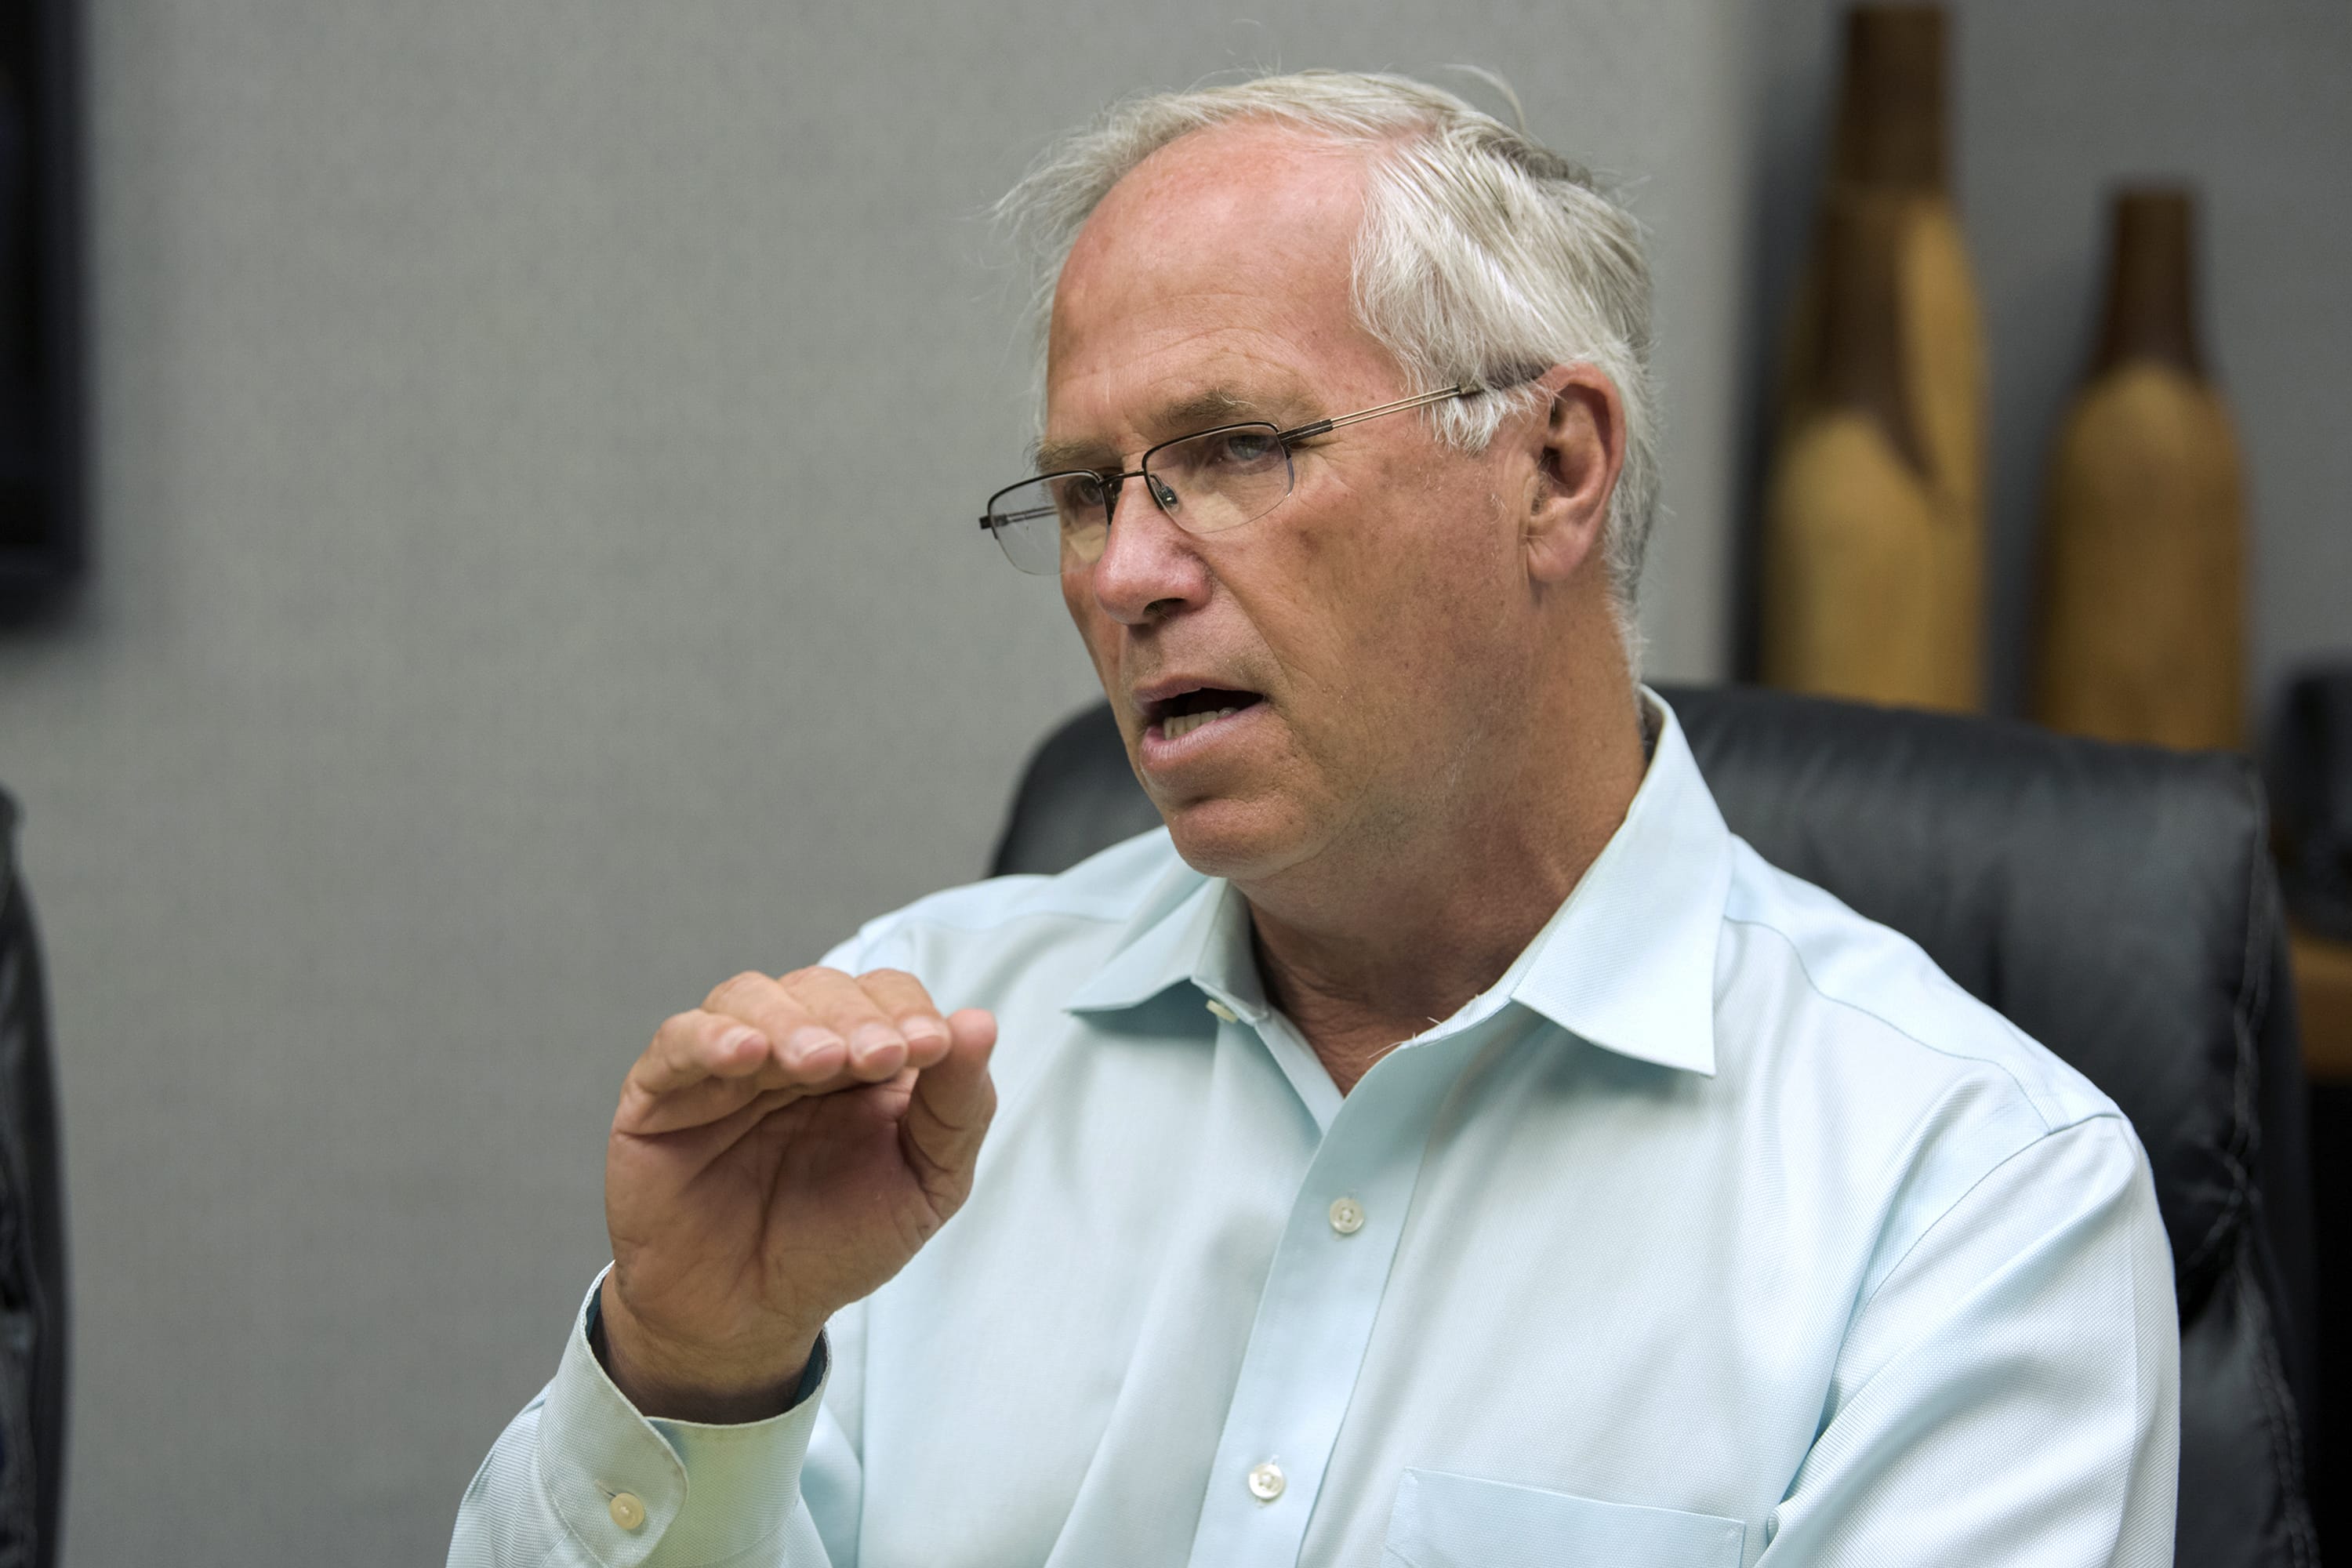 Clark County Council Chair Marc Boldt speaks to The Columbian's Editorial Board on July 3.